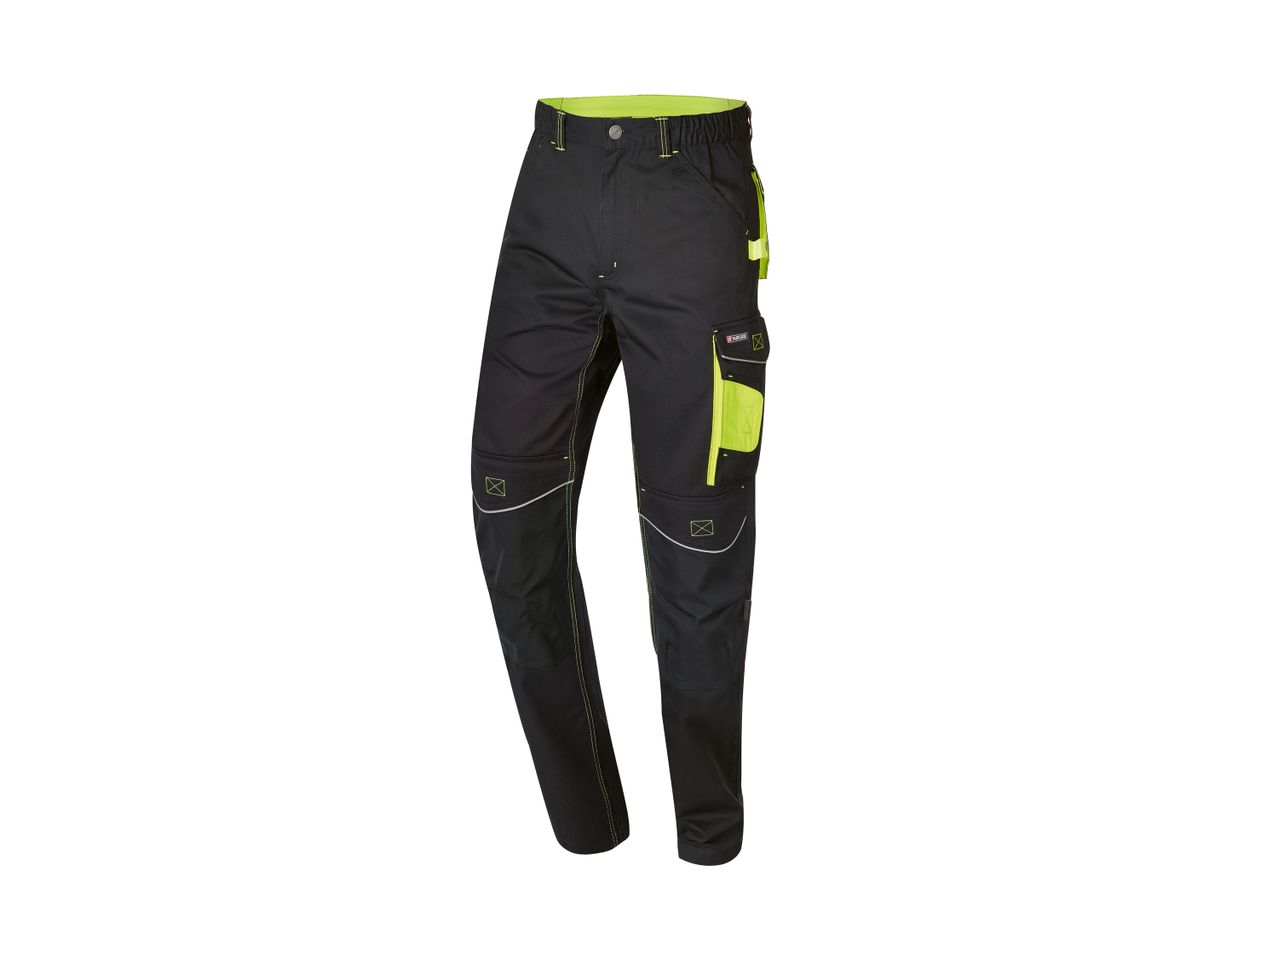 Go to full screen view: Men’s Work Trousers - Image 3